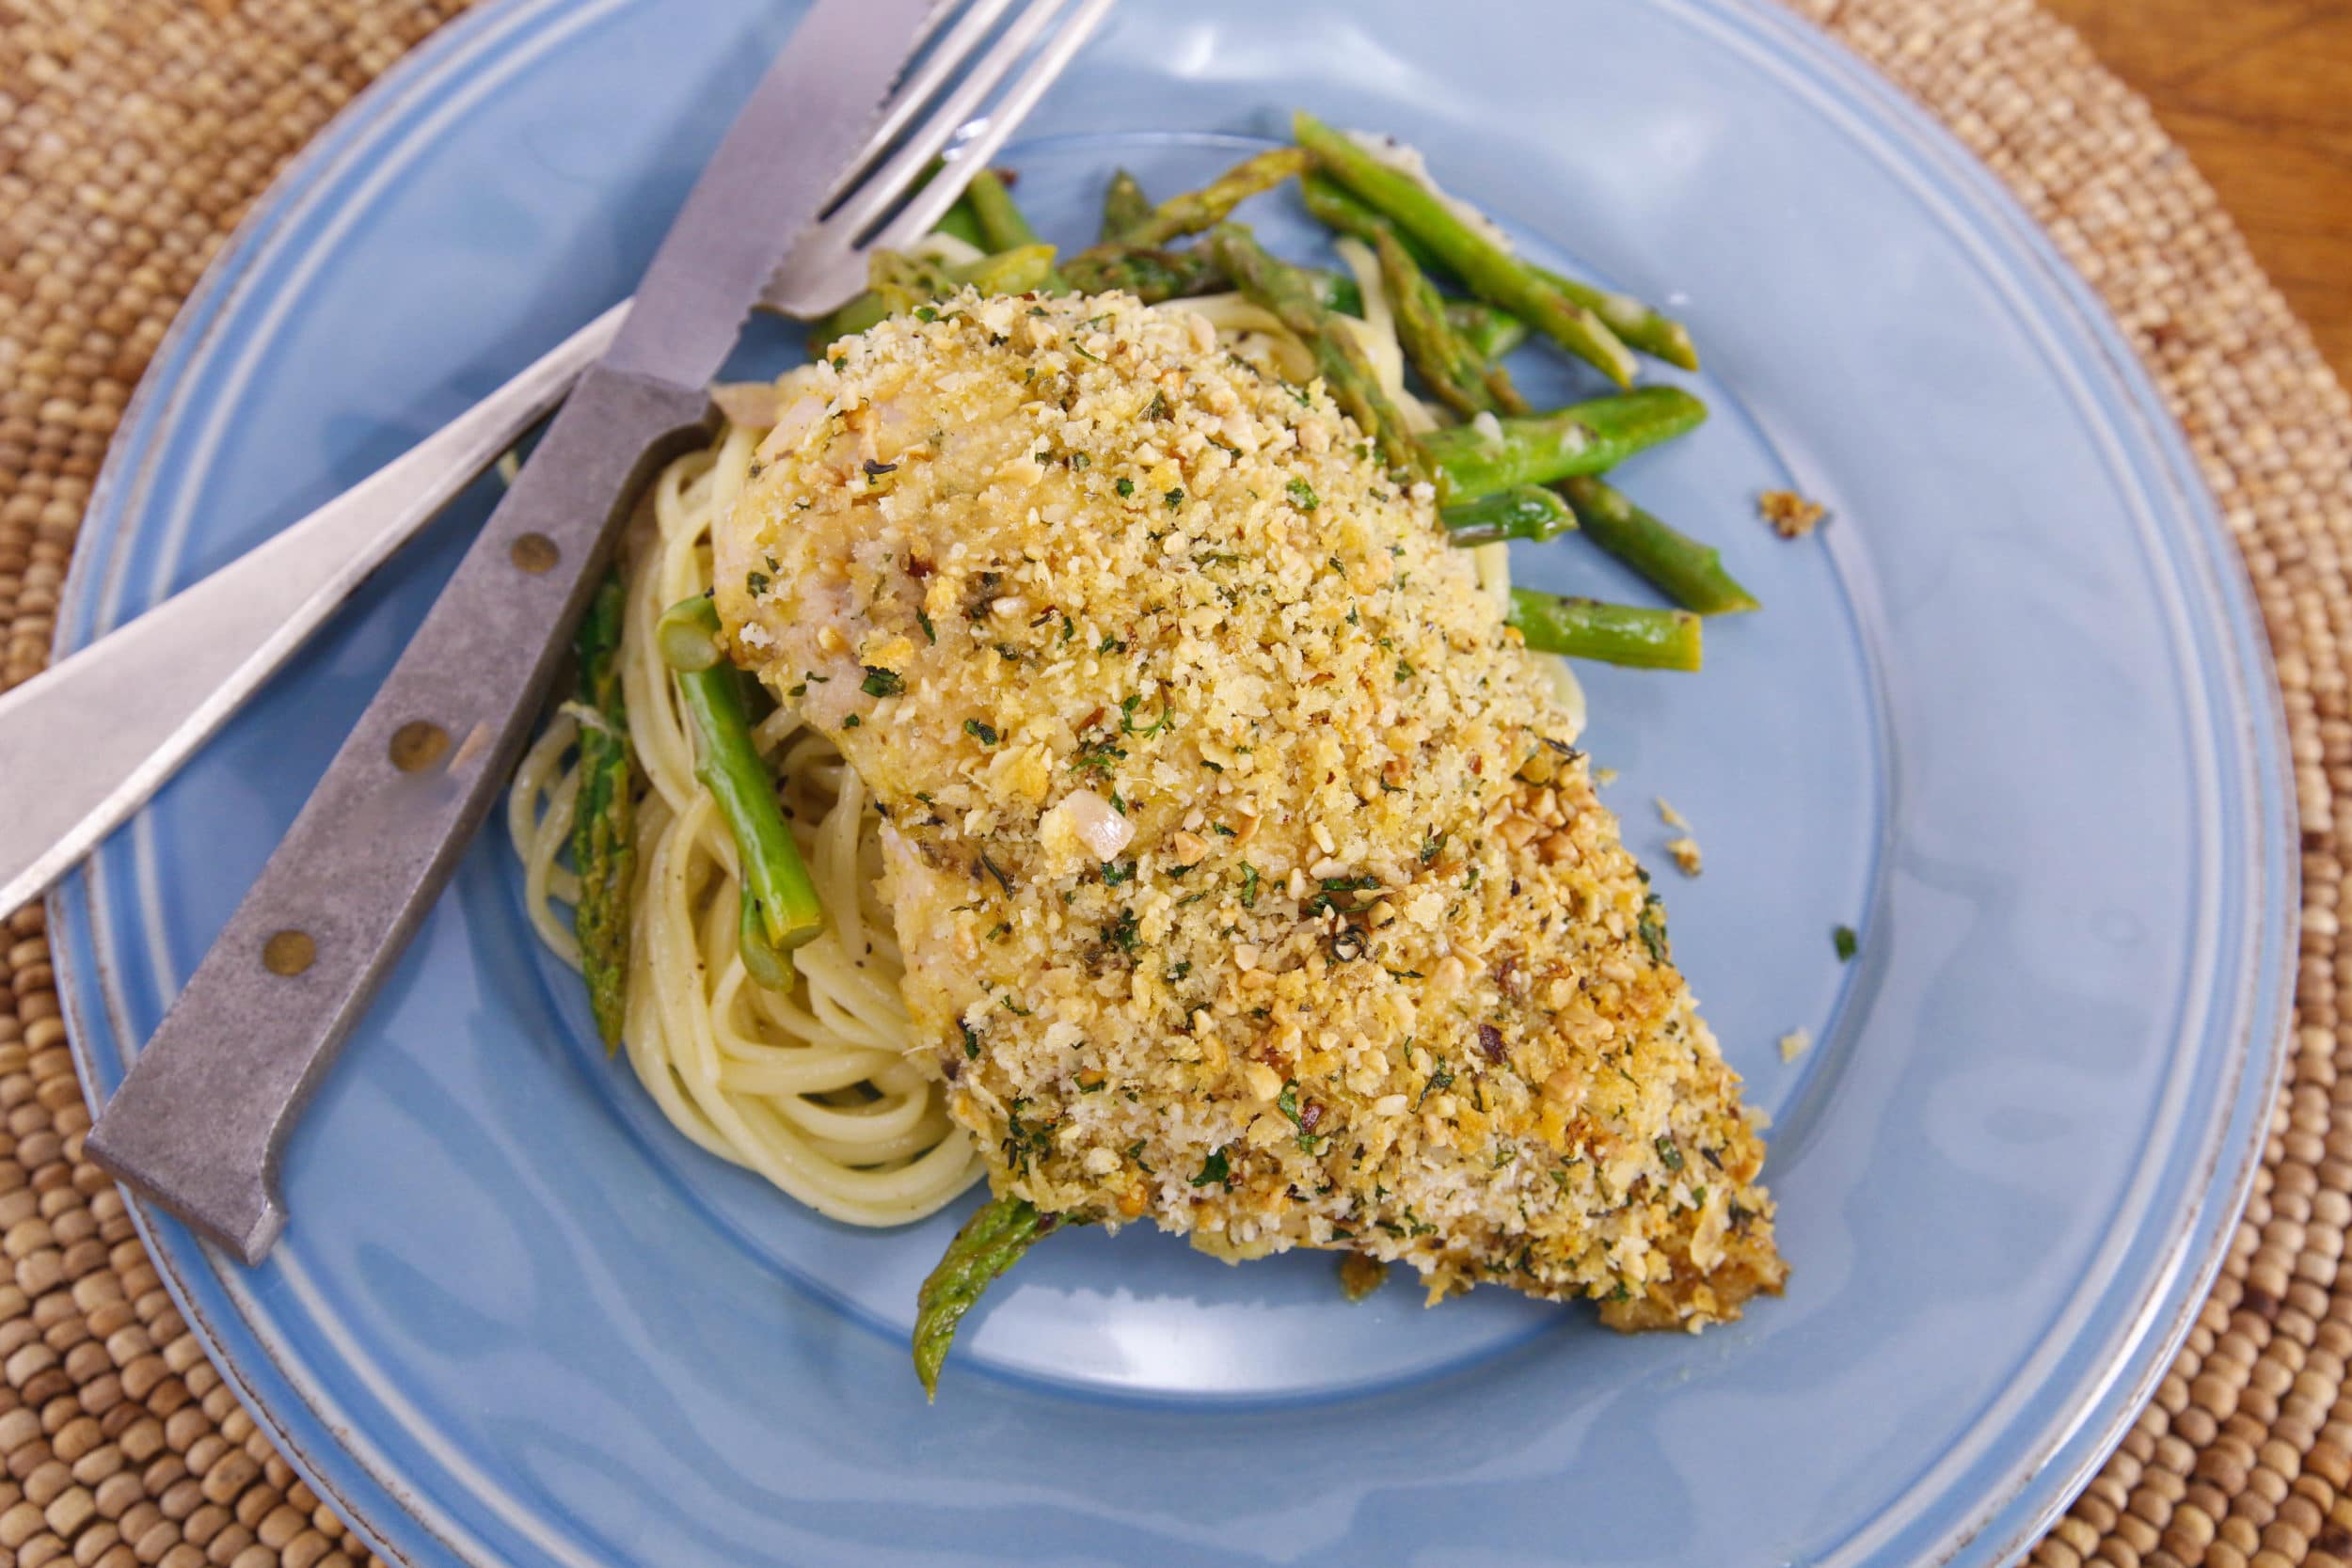 Baked Chicken with Dijon and Nutty Breadcrumbs